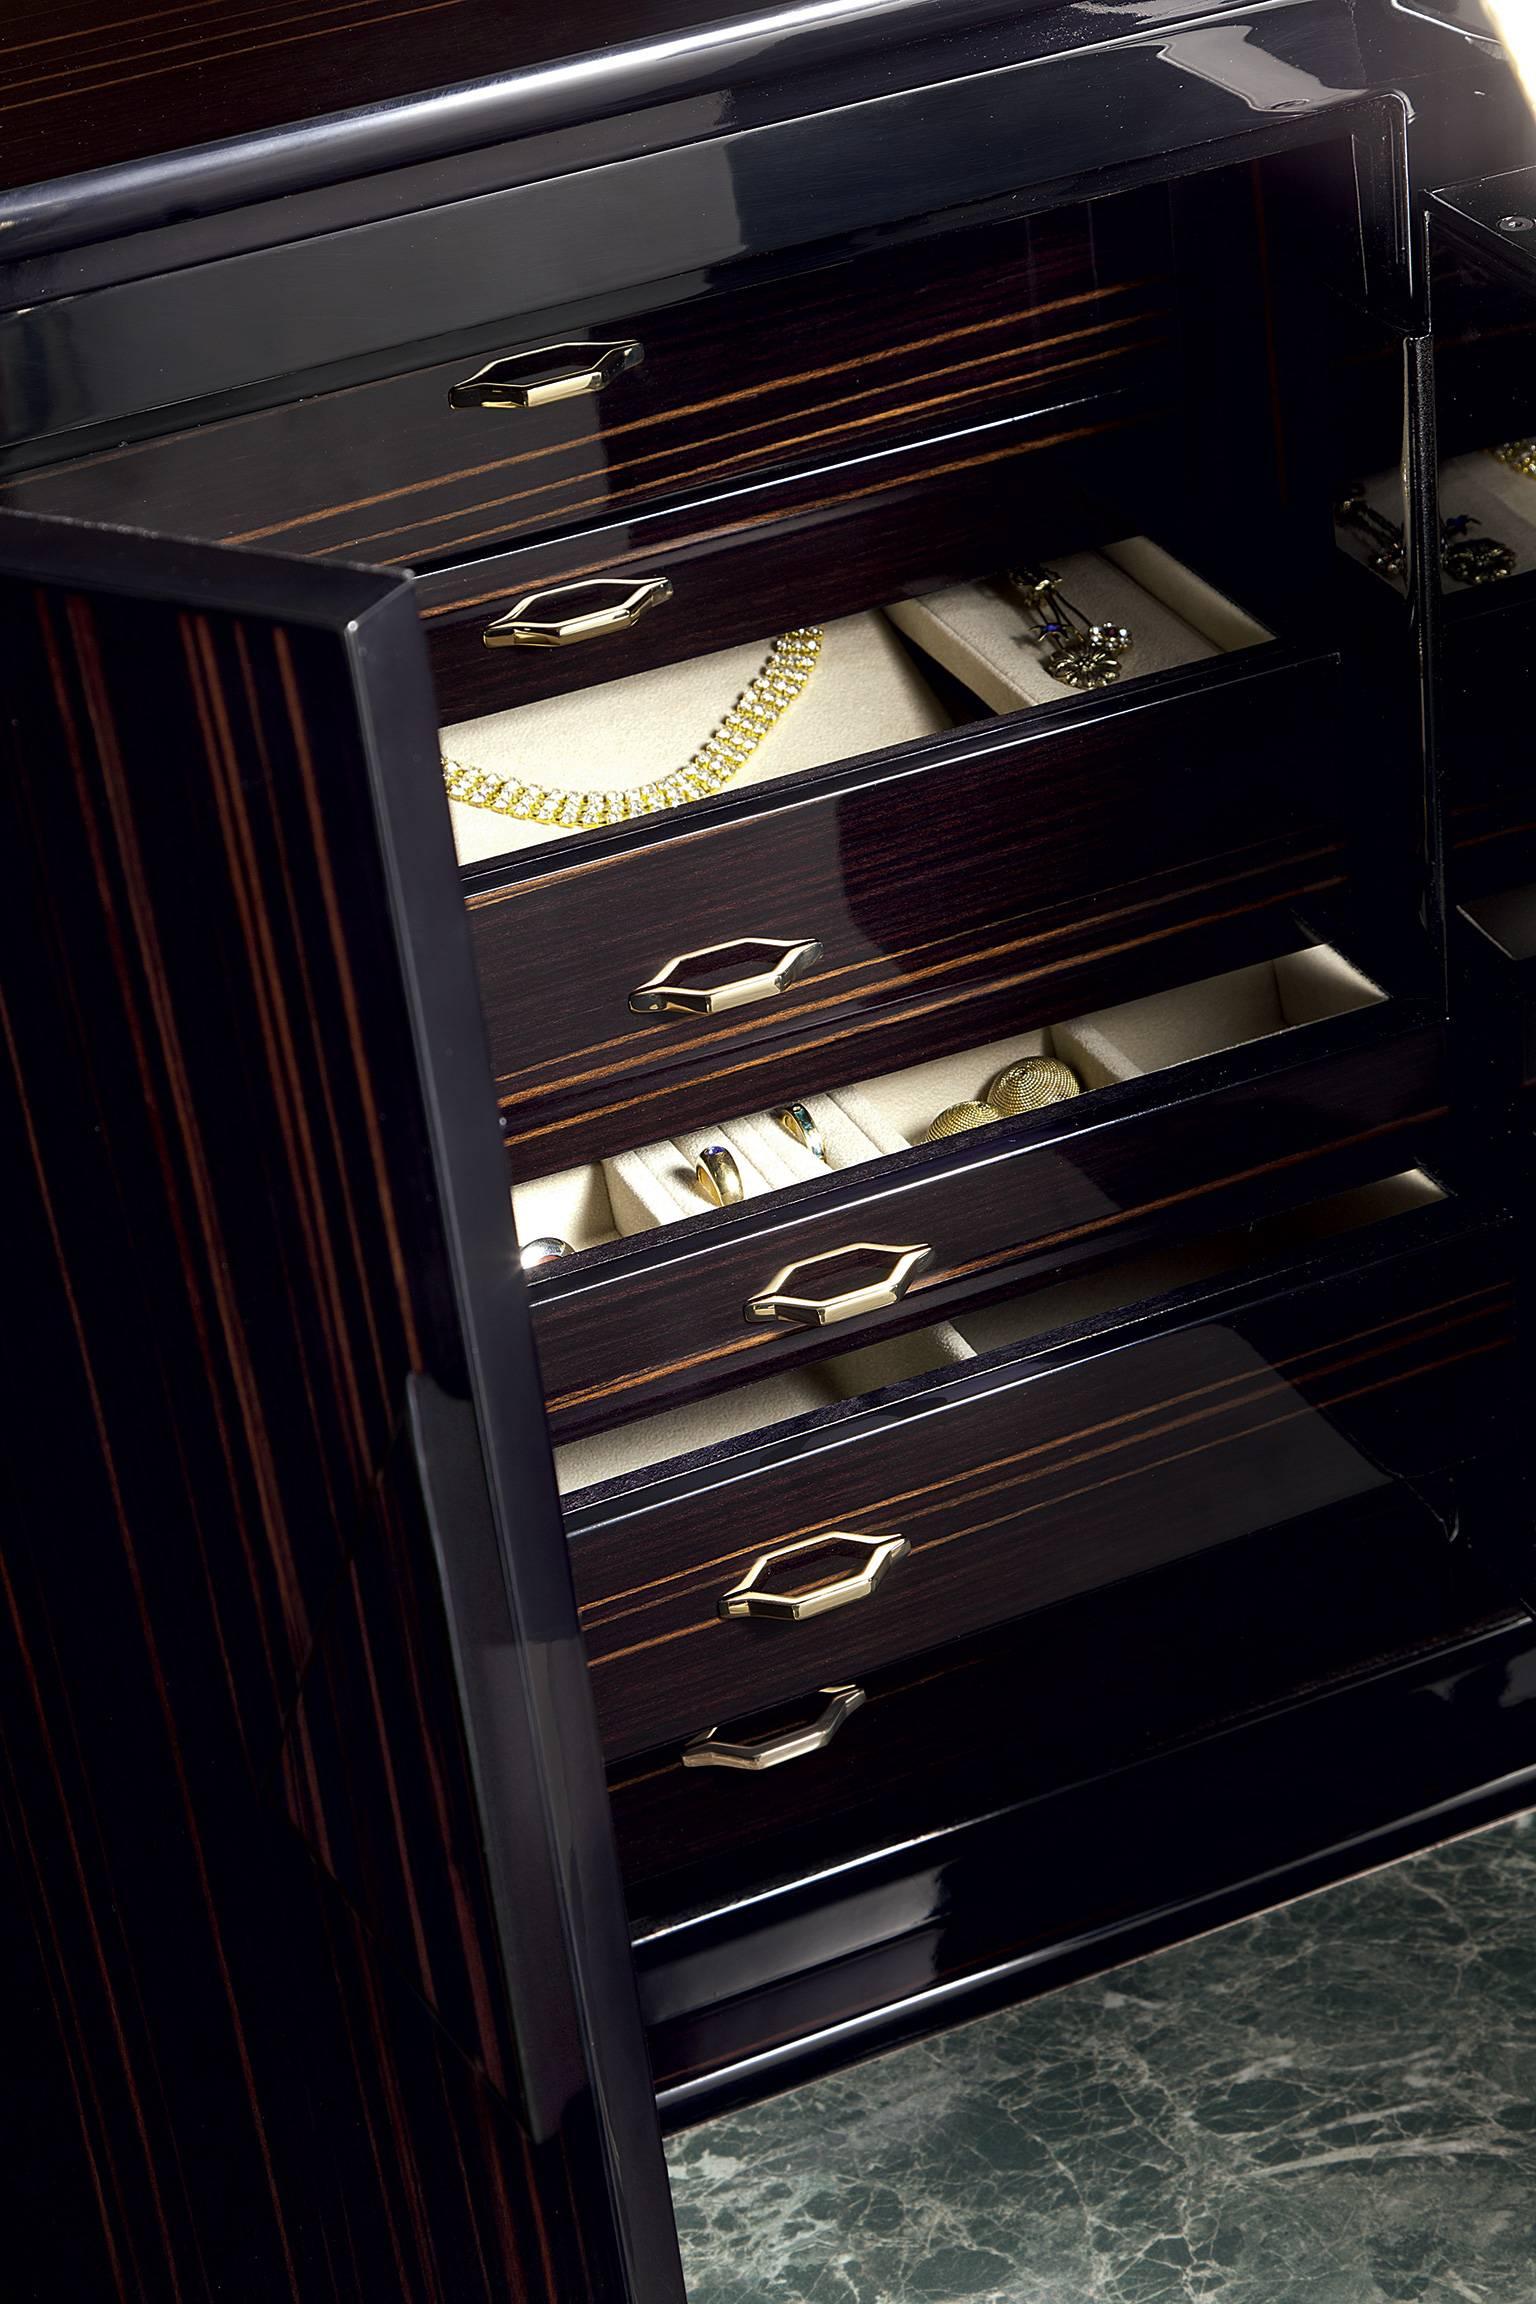 The Agresti Nero Forziere chest safe is made of polished ebony with Grade 2 safe. 
It contains six drawers which are lined to store all sorts of jewels and has a necklace bar. Brass-plated, 24-karat gold accessories. Unique features of this